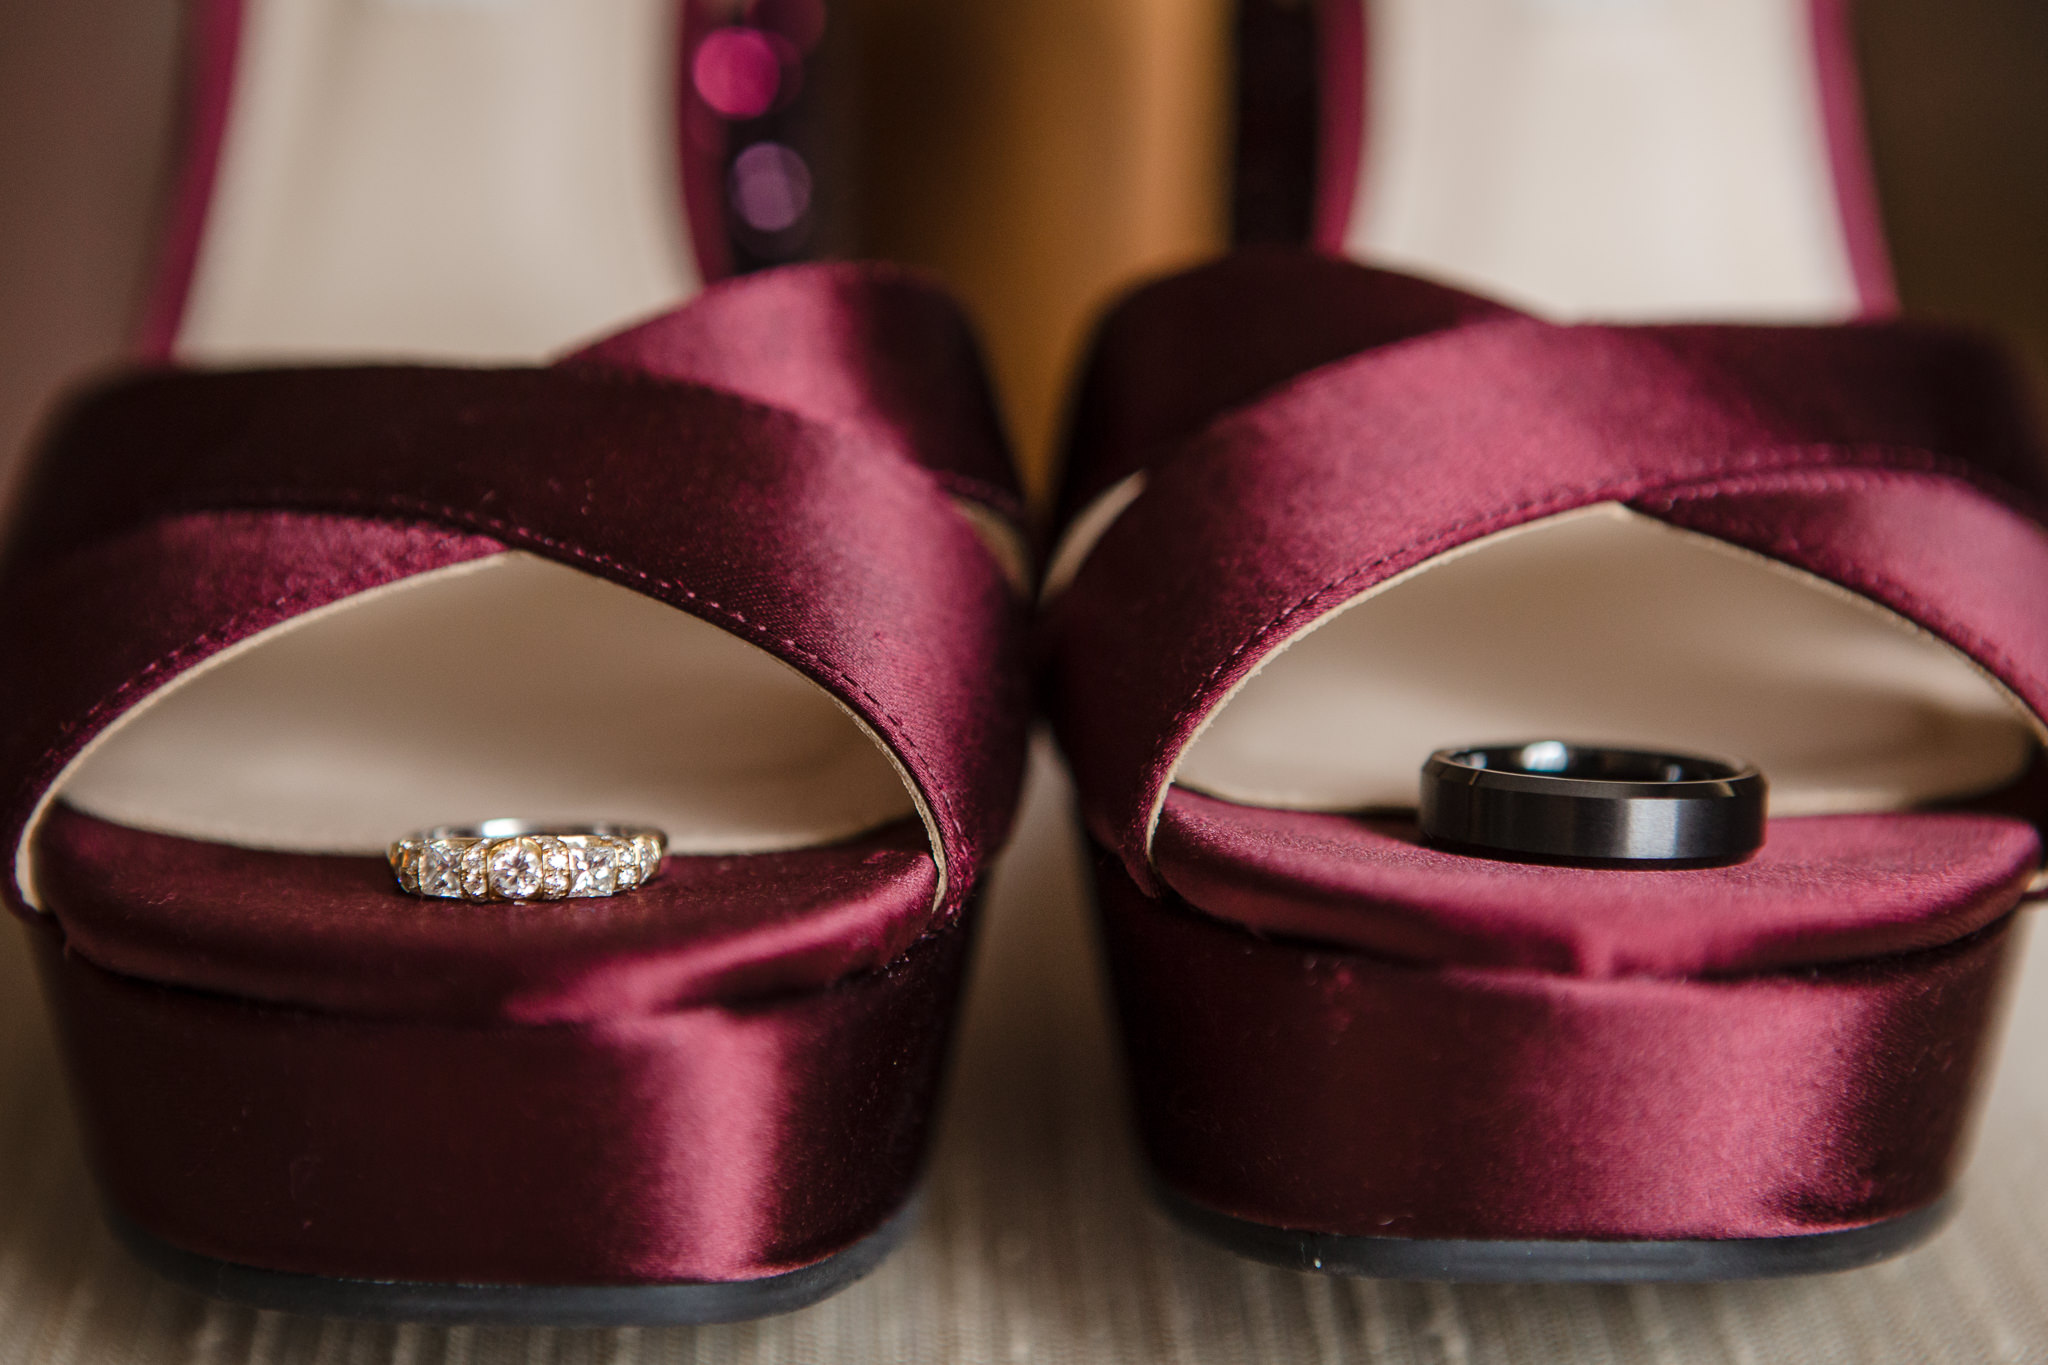 Wedding bands rest in the bride's burgundy shoes